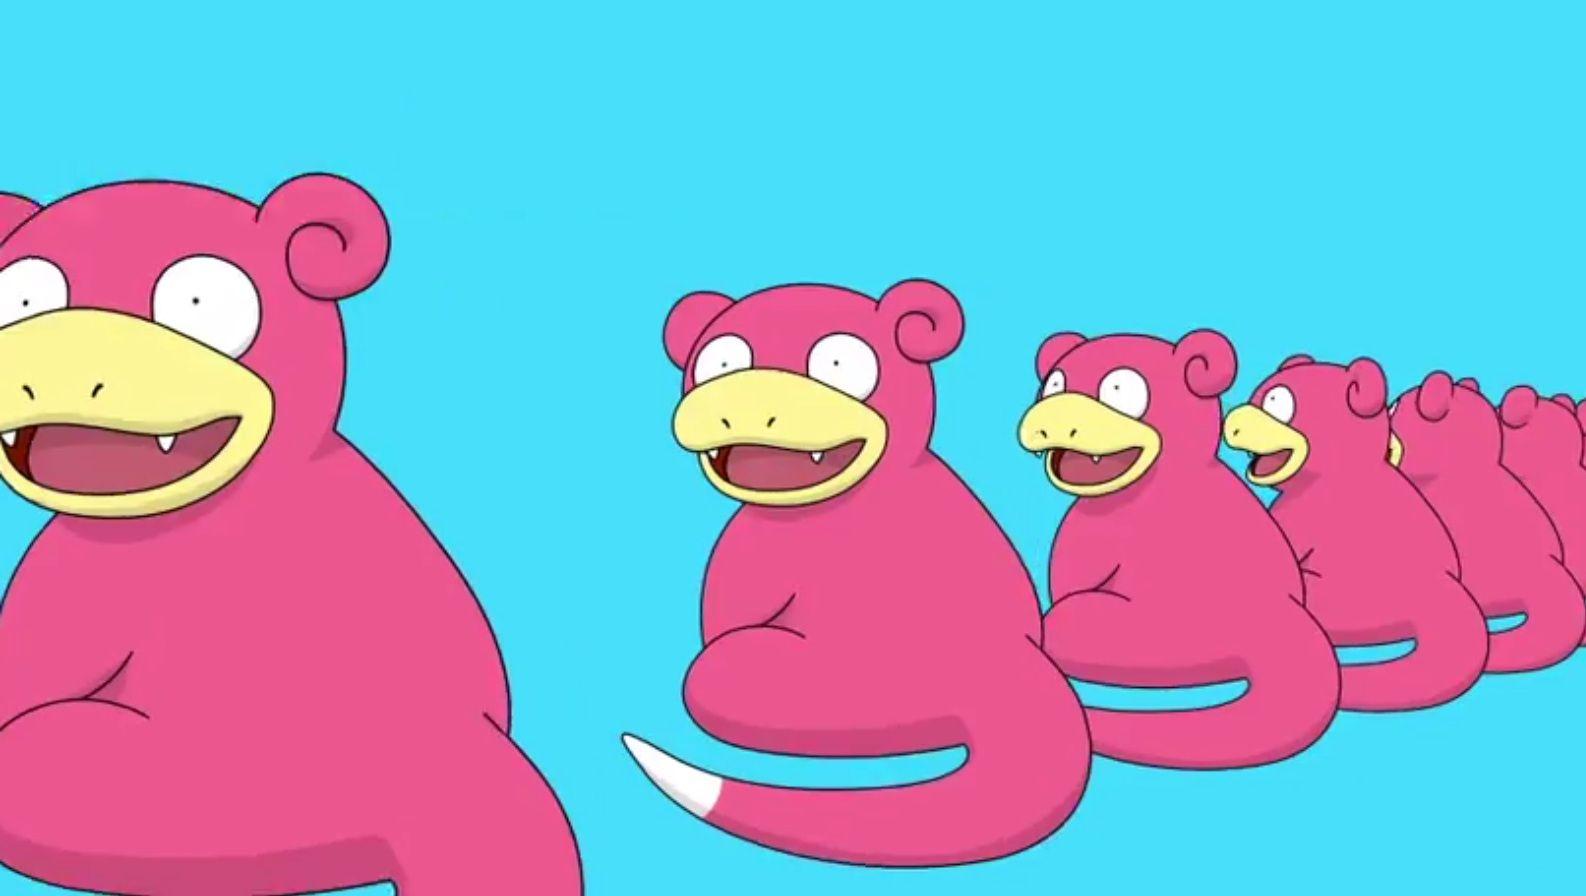 HD Slowpoke Wallpaper and Photo, 1586x896. By Lakesha Blessing